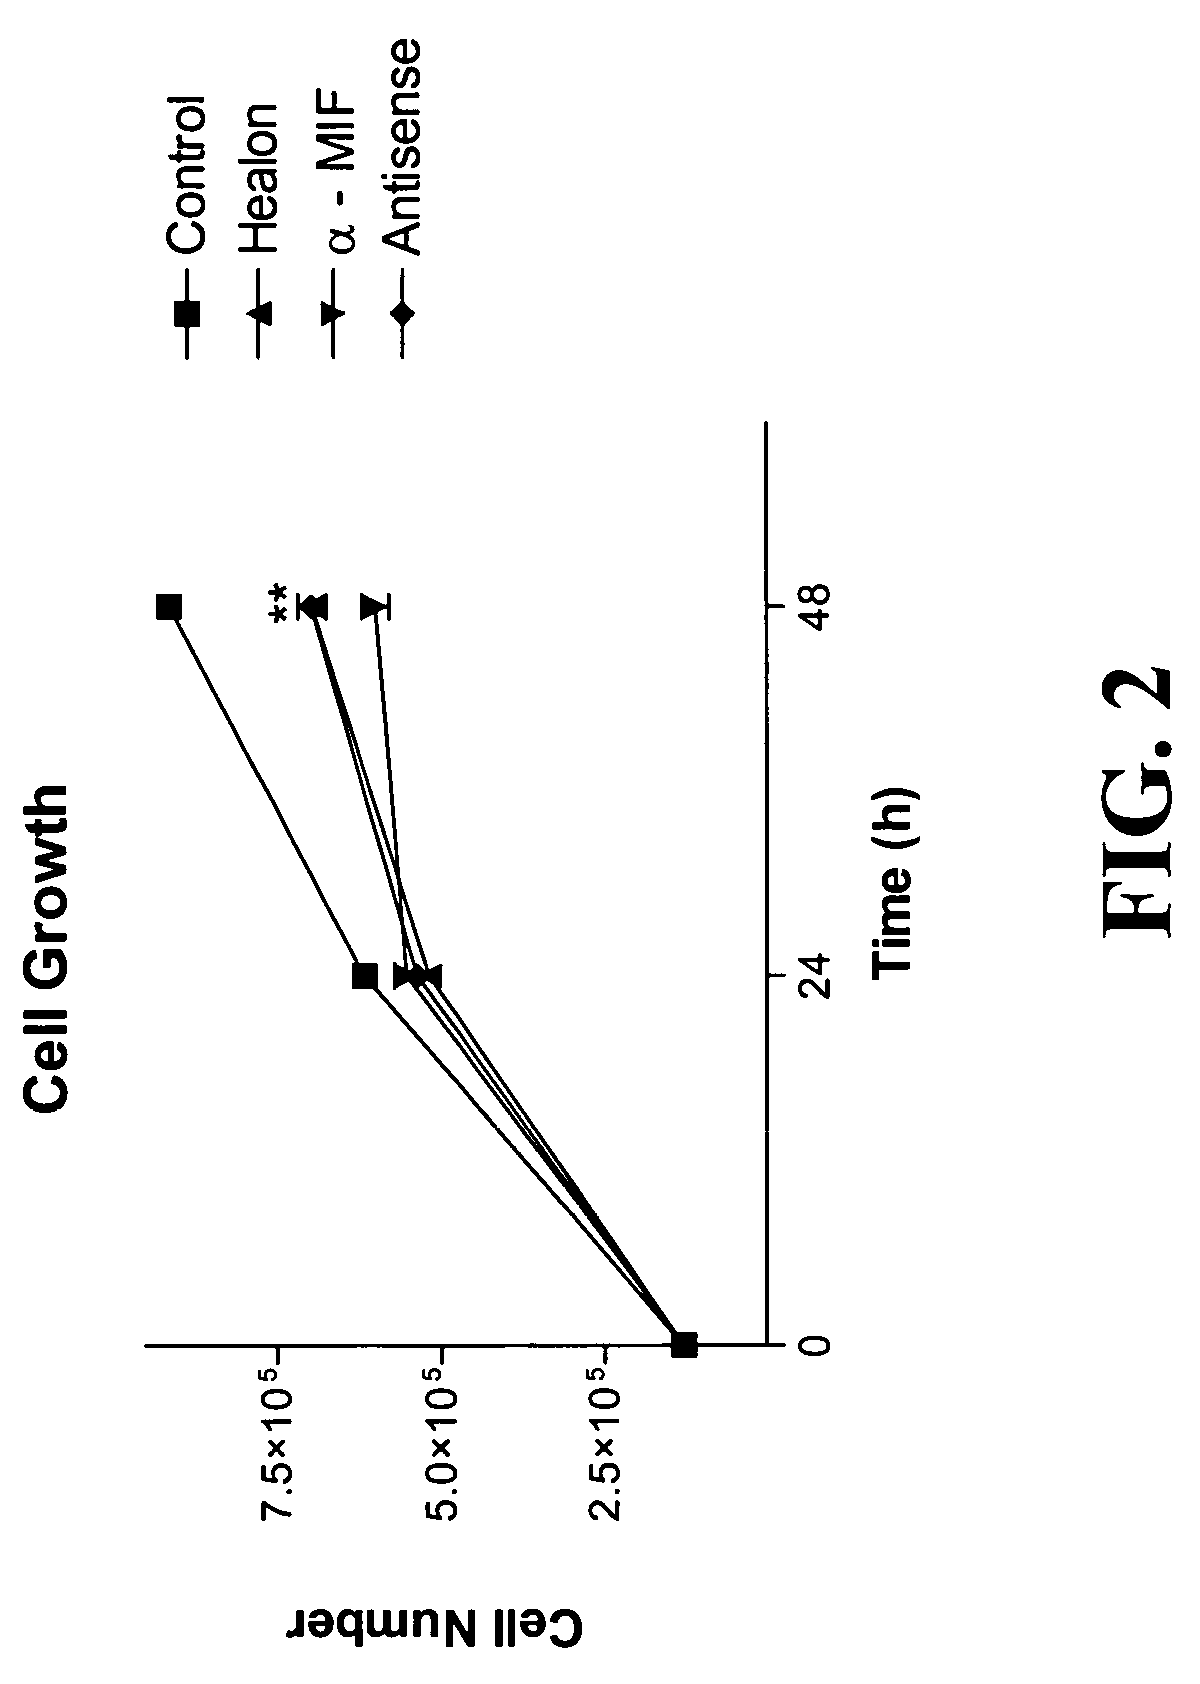 Methods for diagnosing and treating bladder cancer